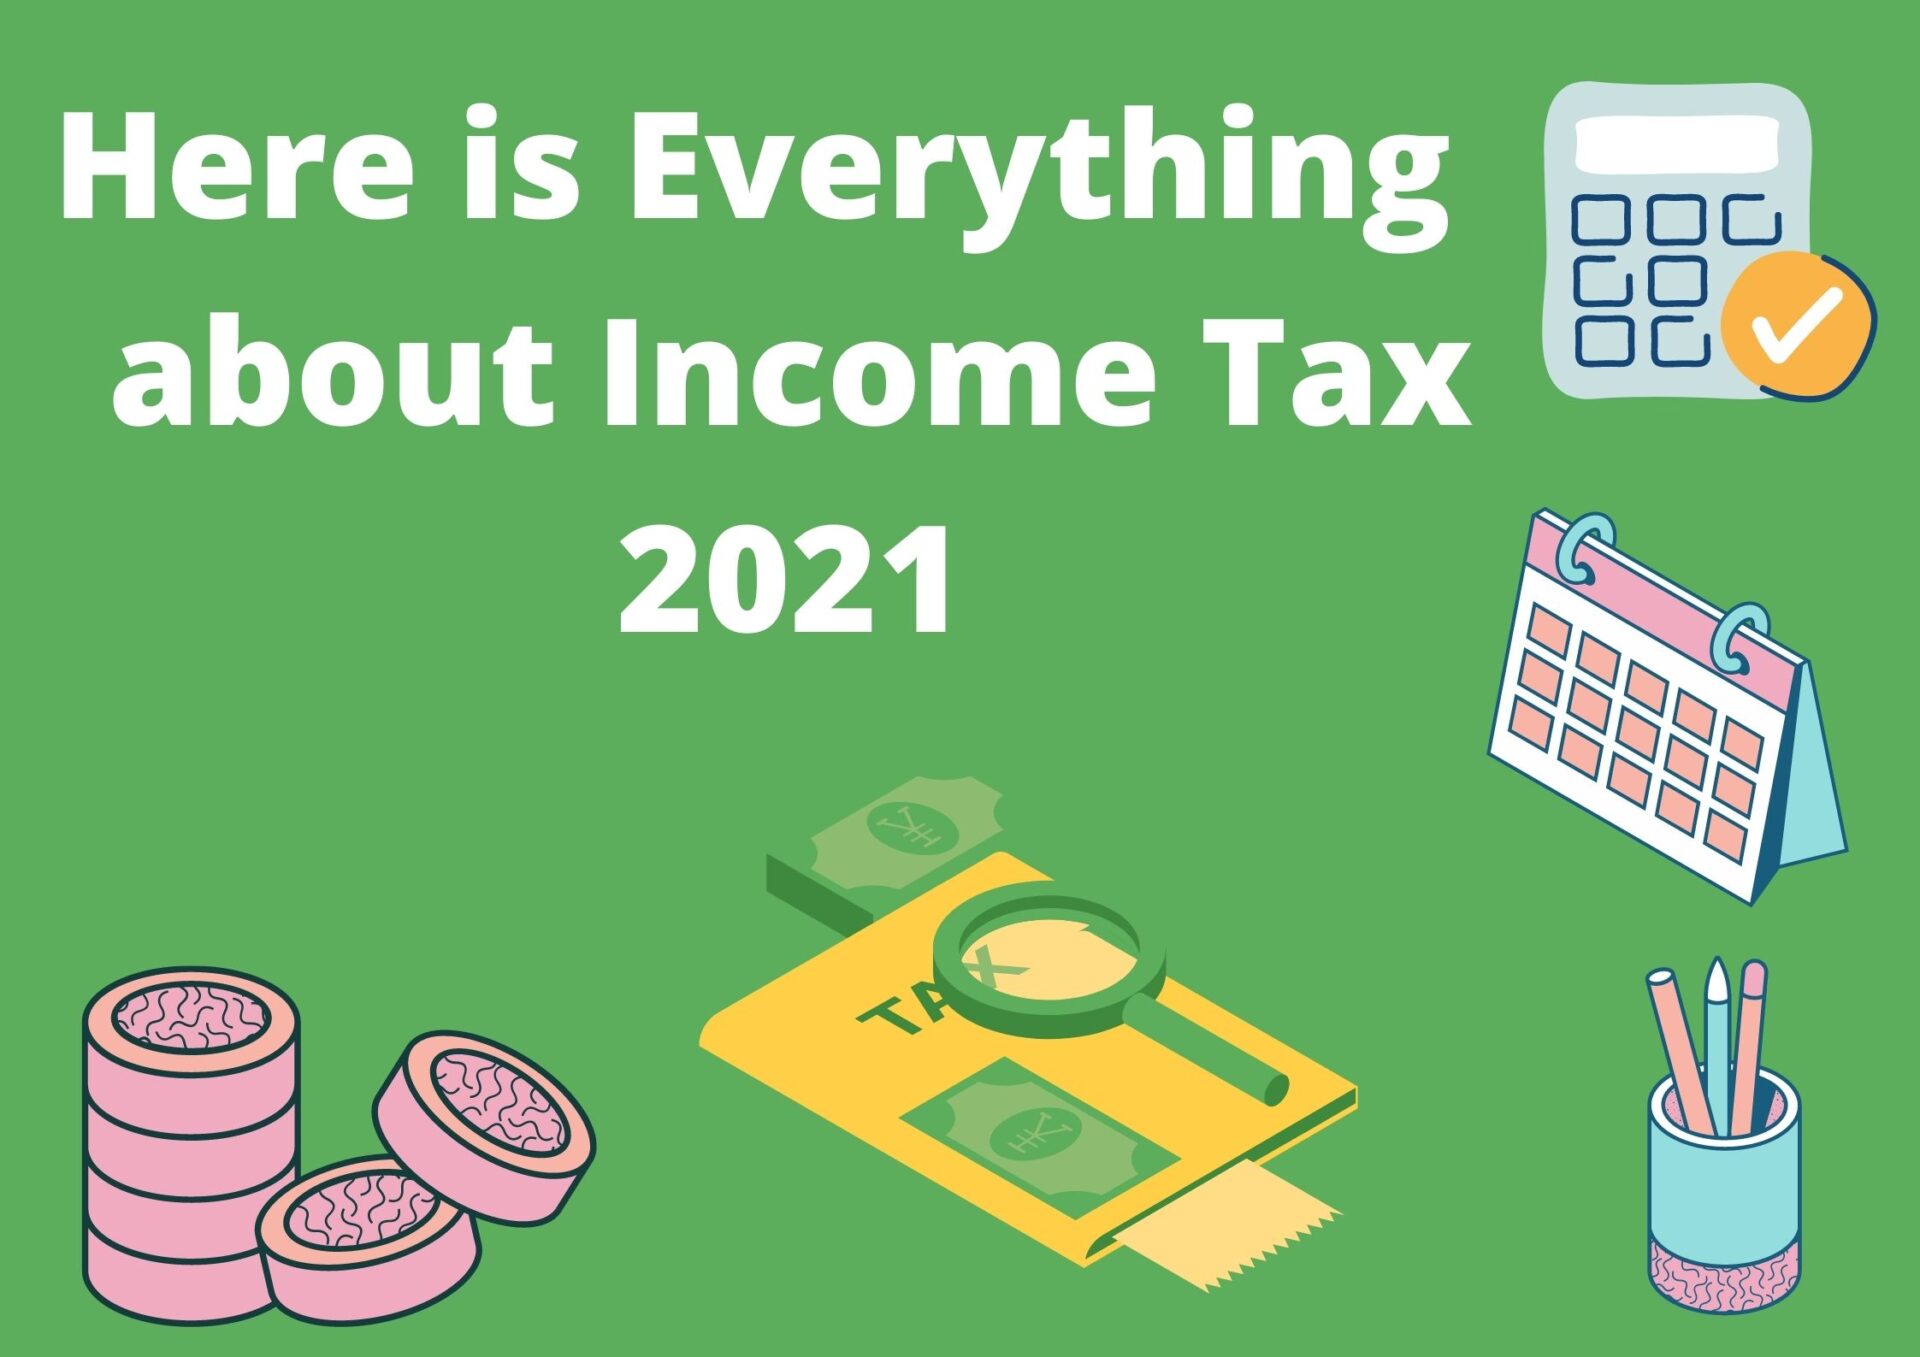 Here is Everything about Income Tax 2021